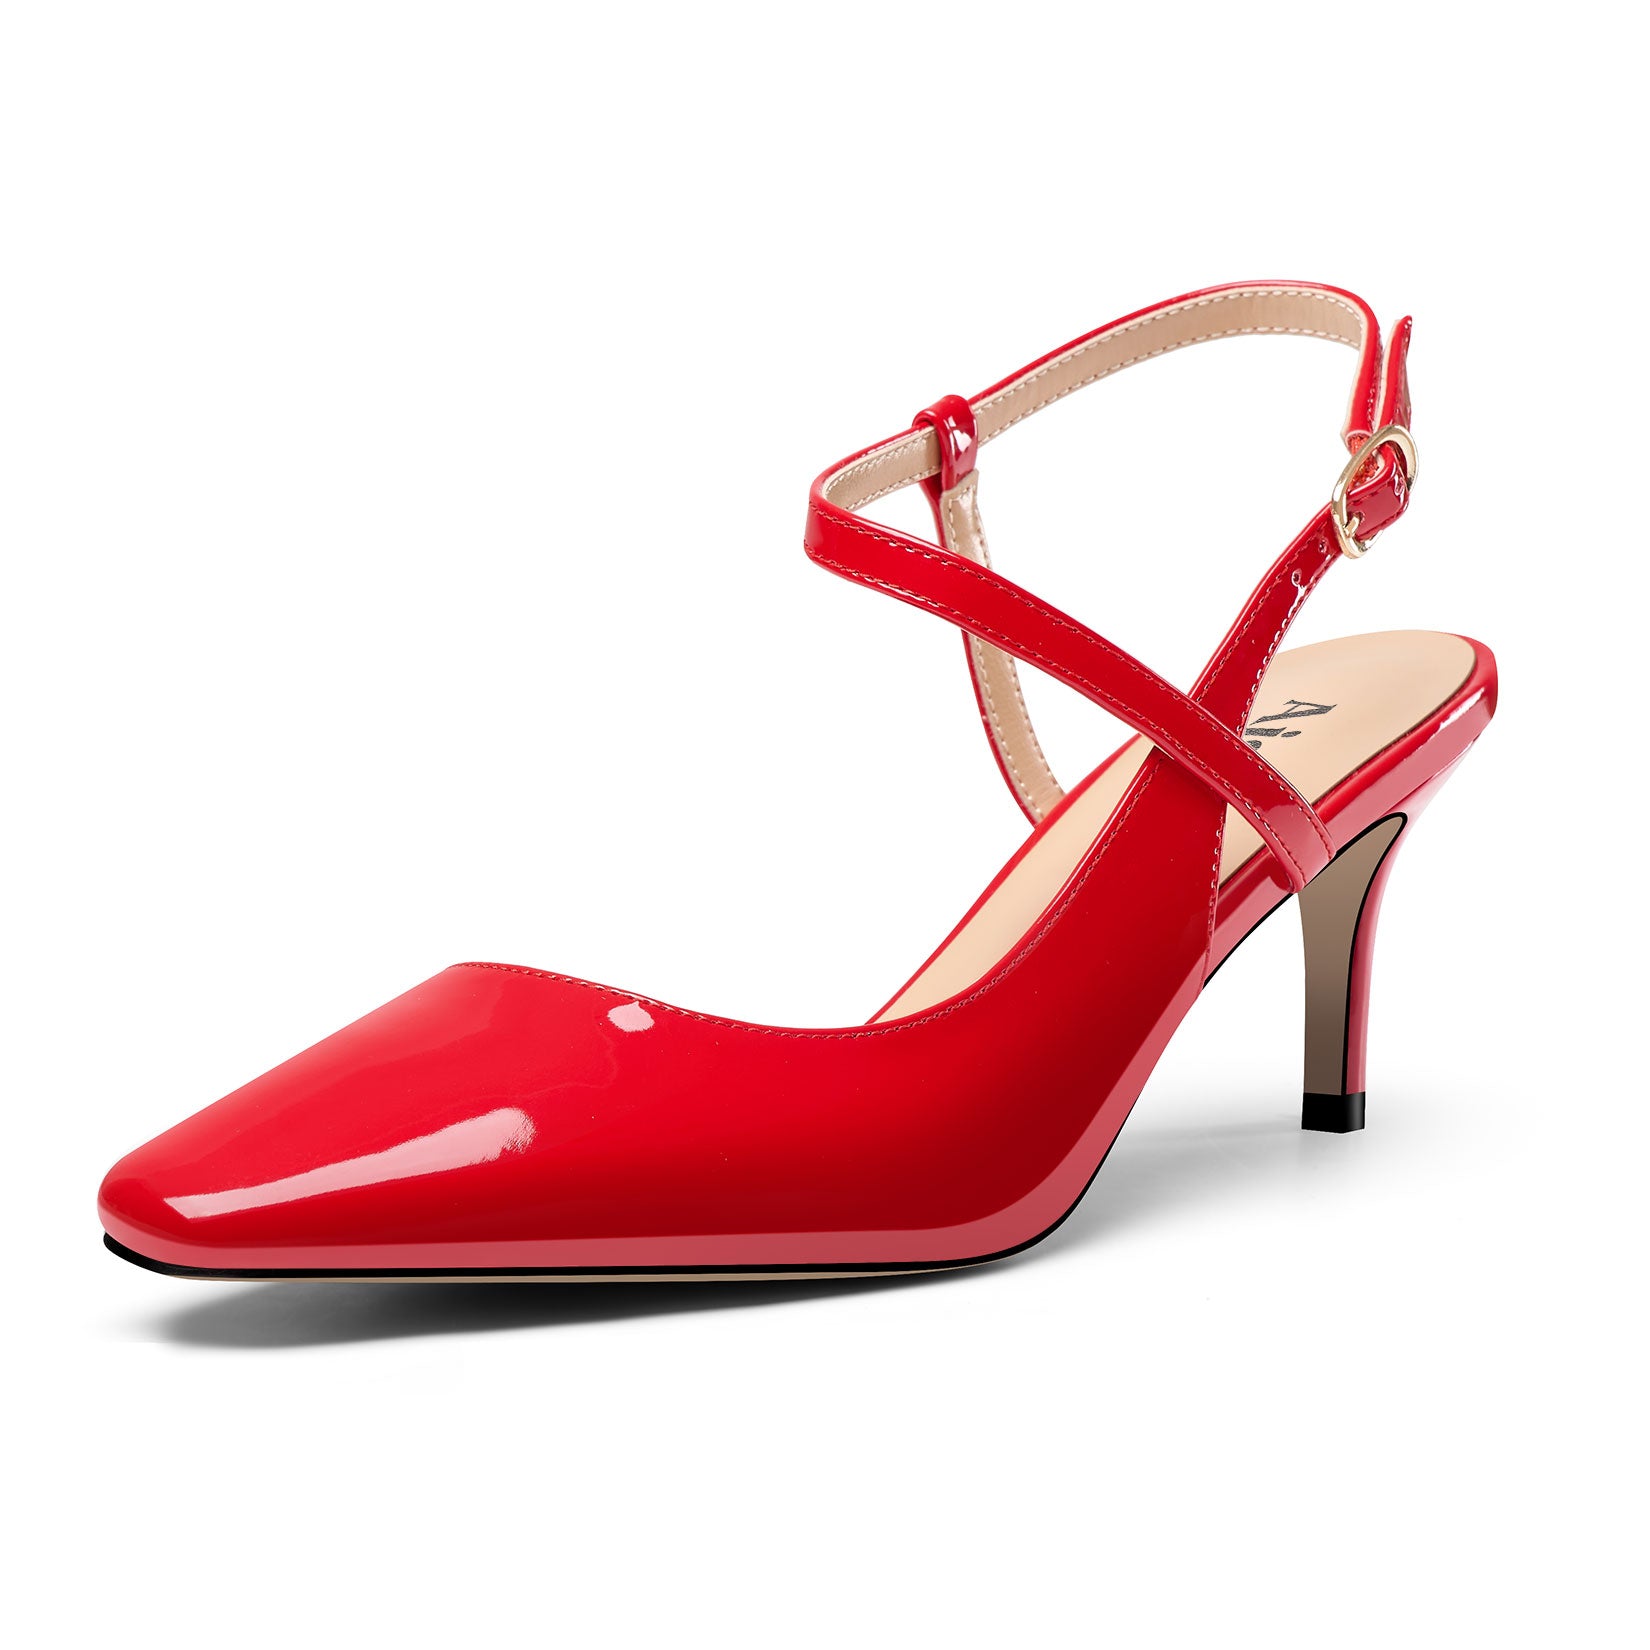 Salema Red Patent Pointed-Toe Pumps